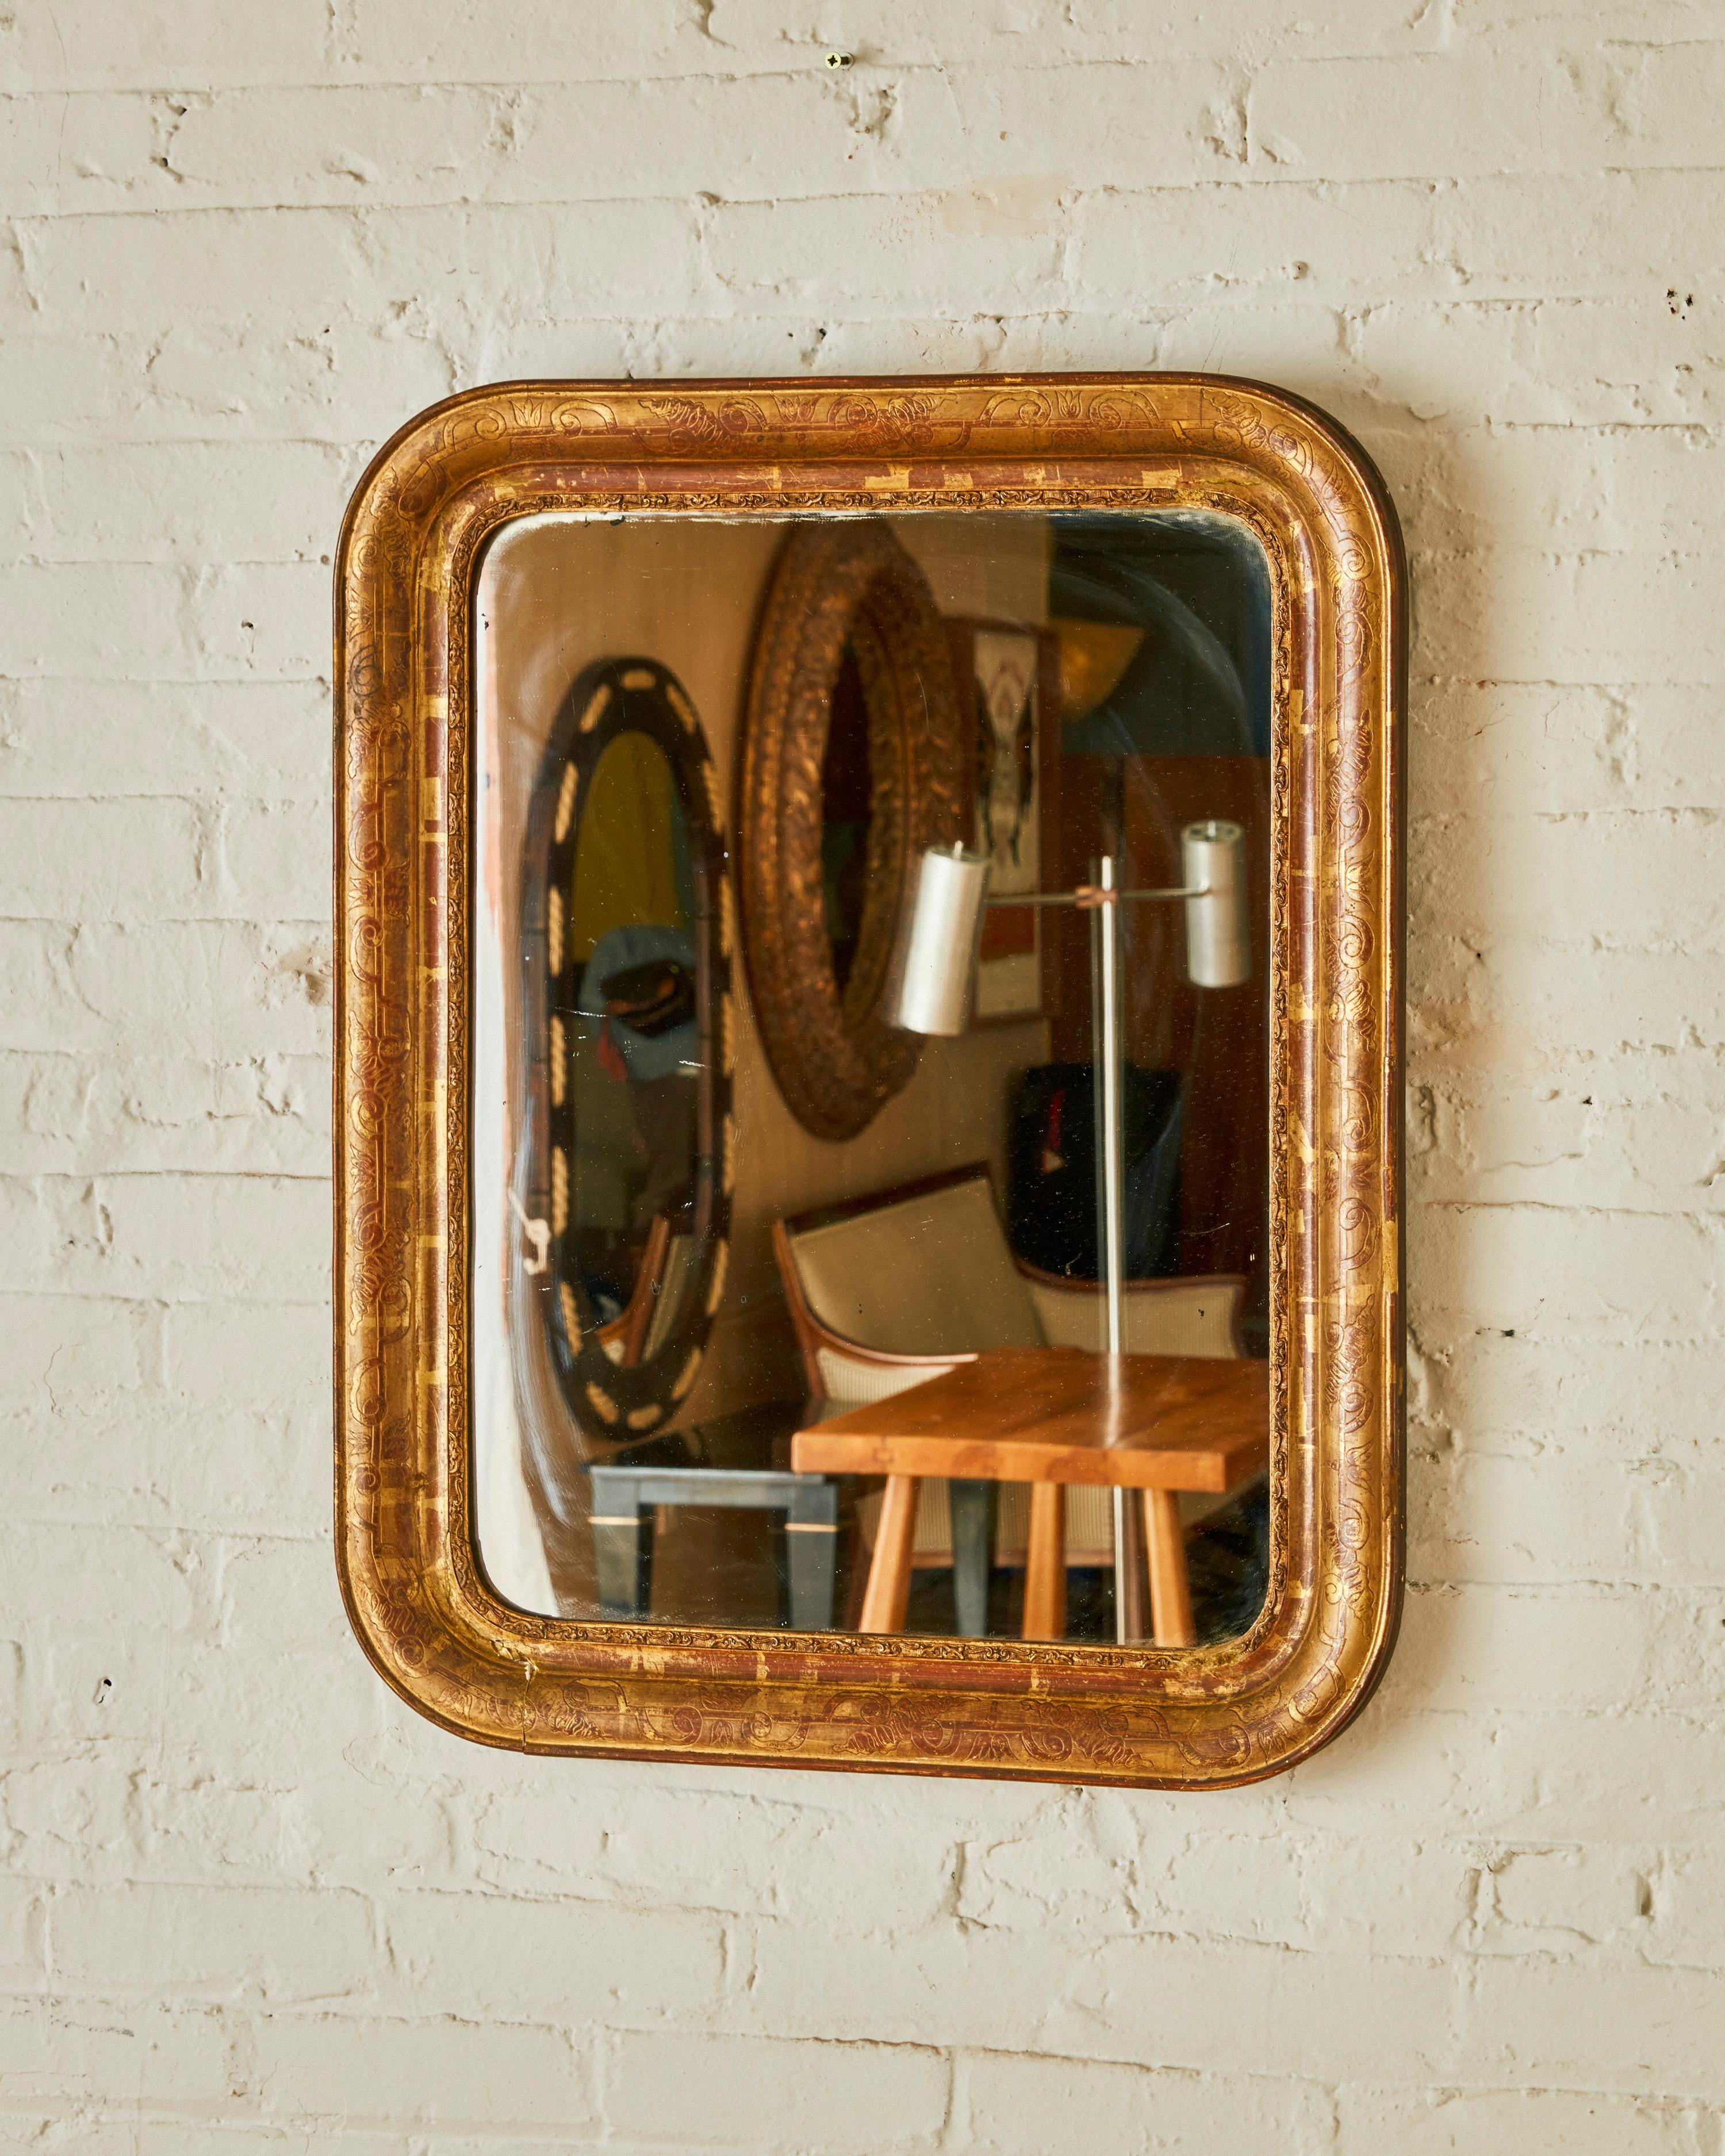 19th Century Louis Philippe Giltwood Mirror with a molded frame and rounded corners.

